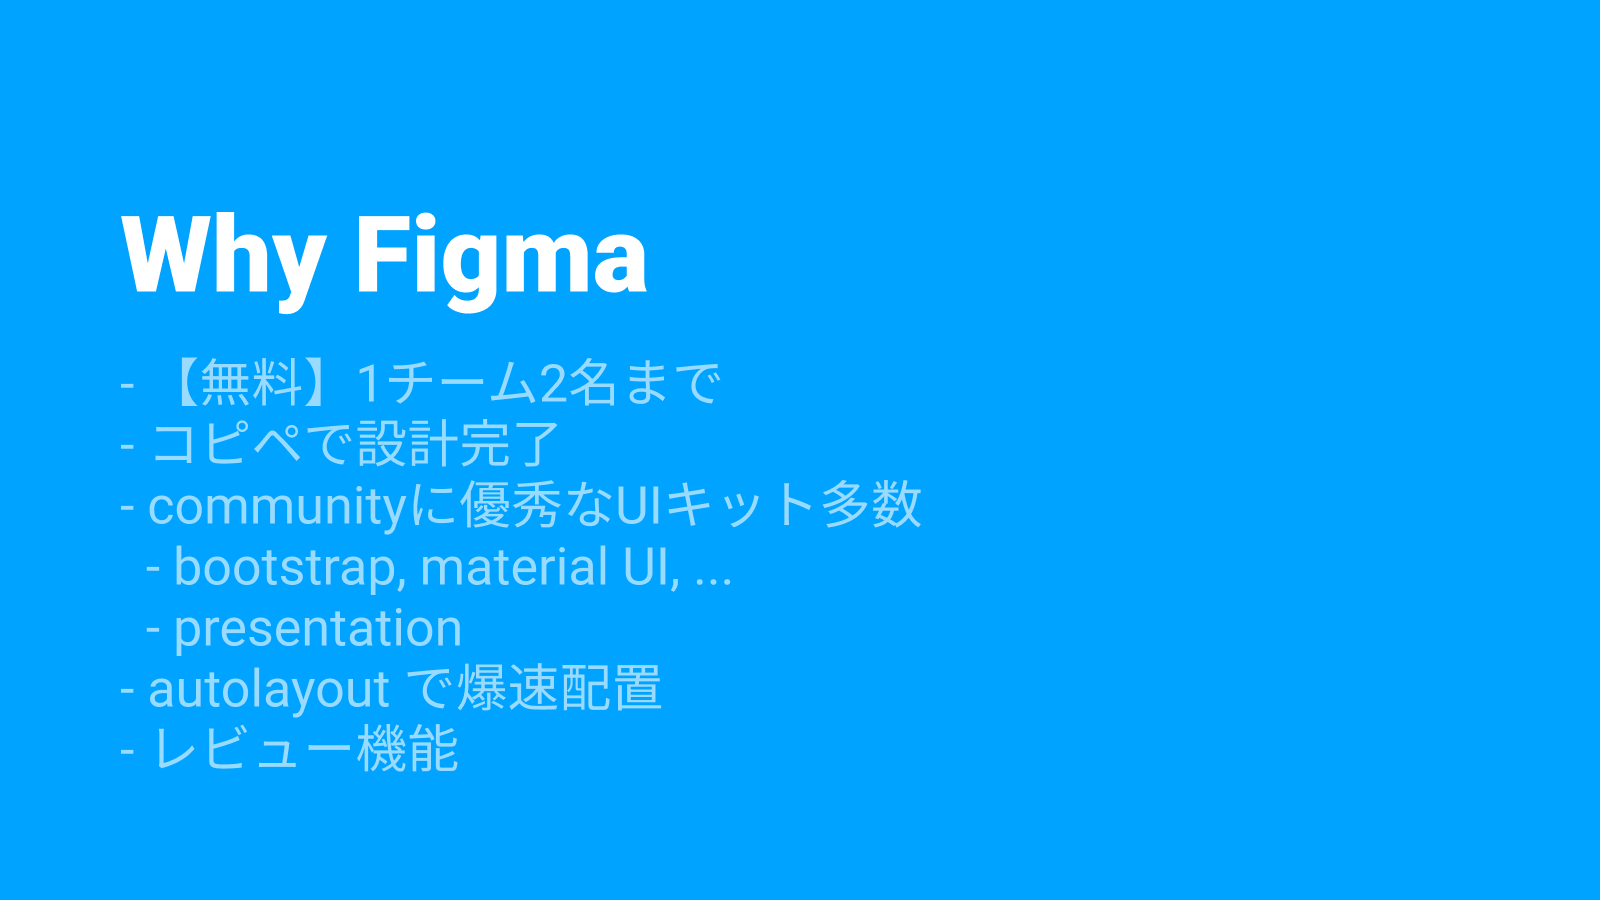 03_Why Figma.png